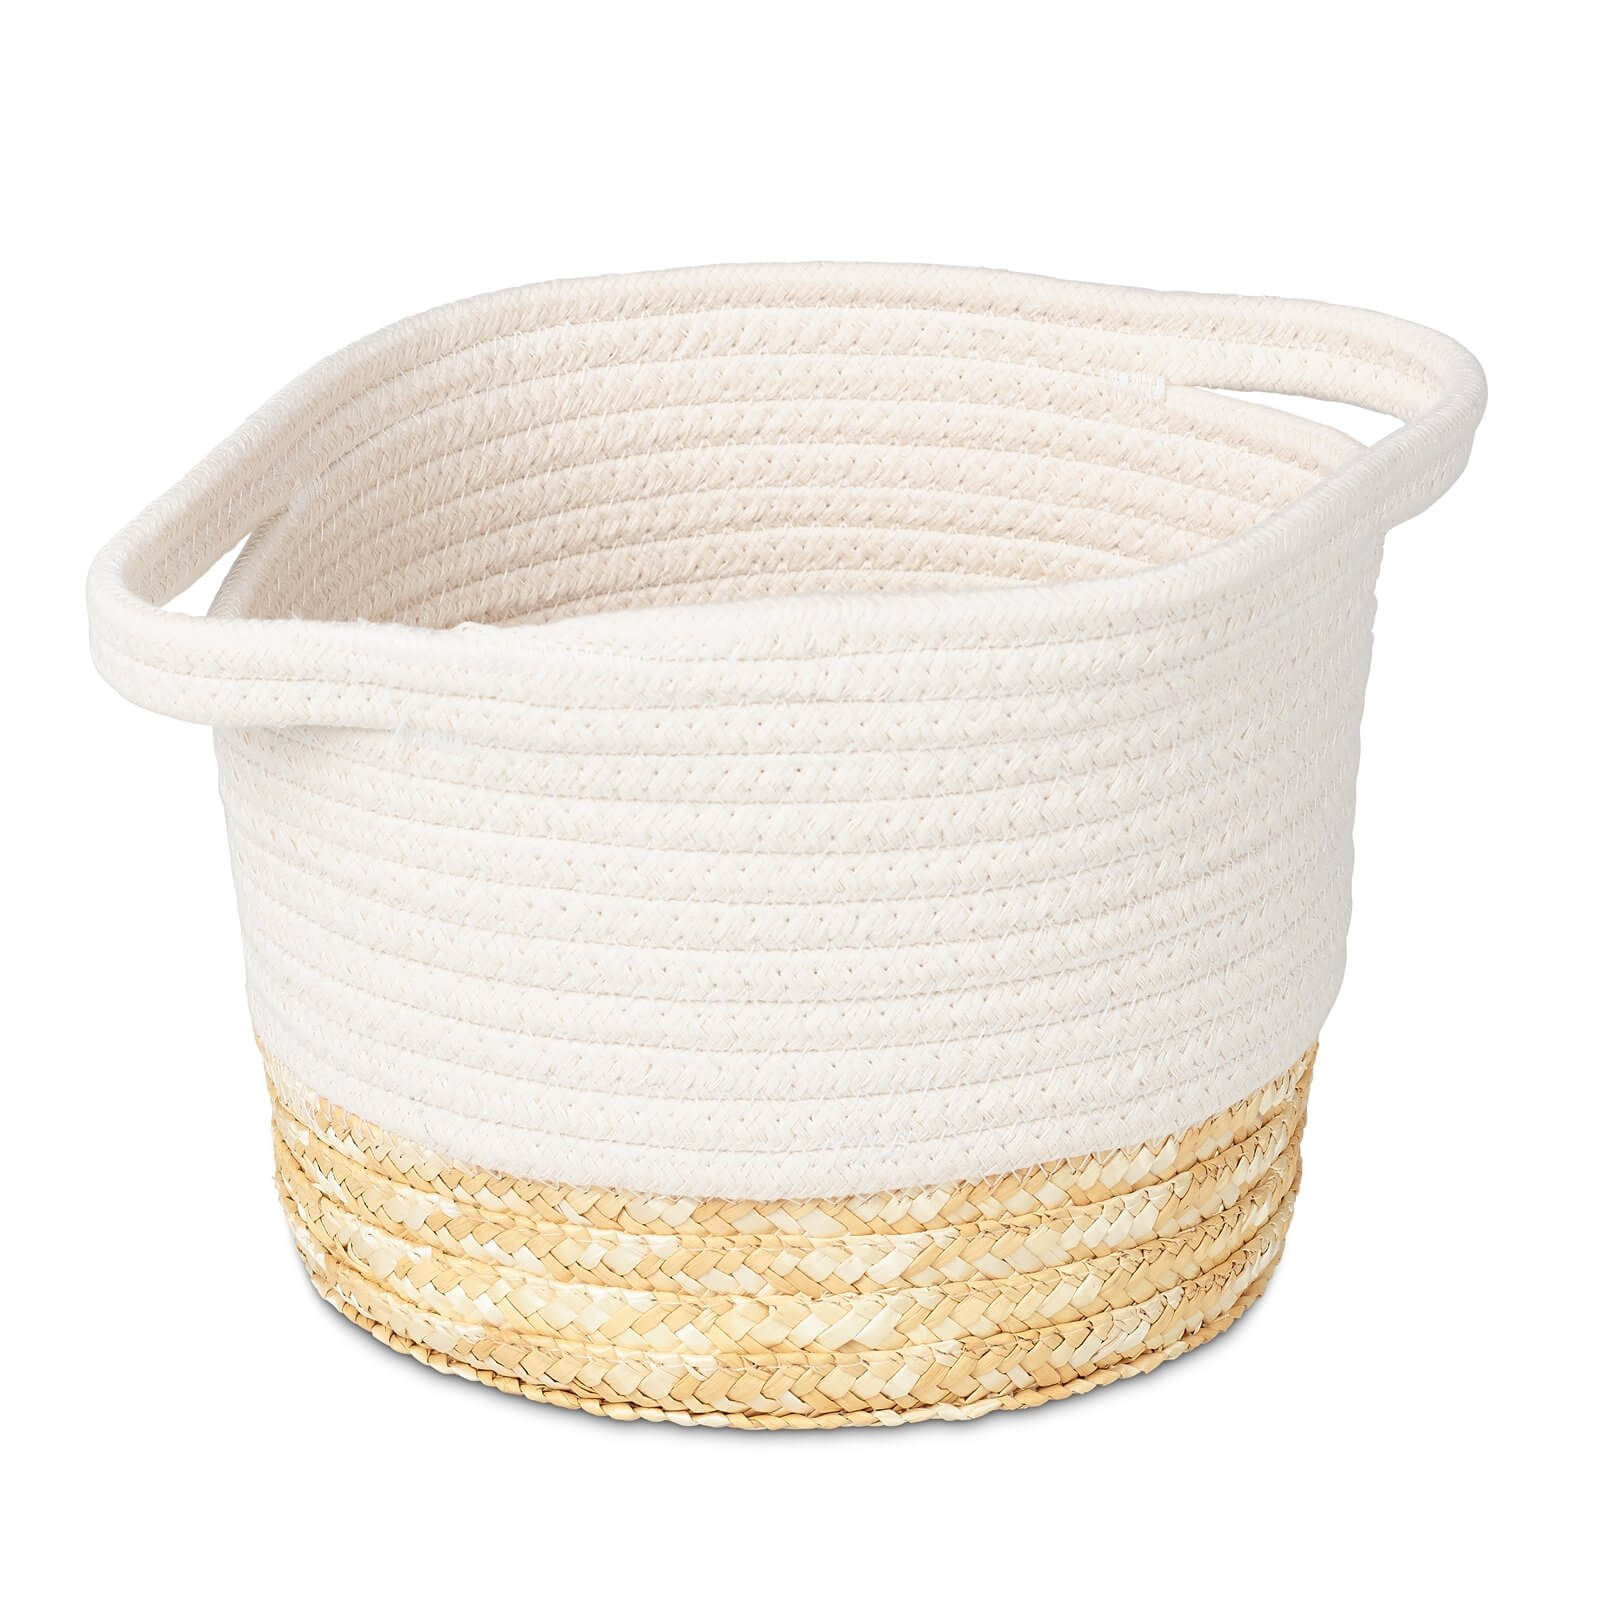 Small Rope Storage Basket - White Top